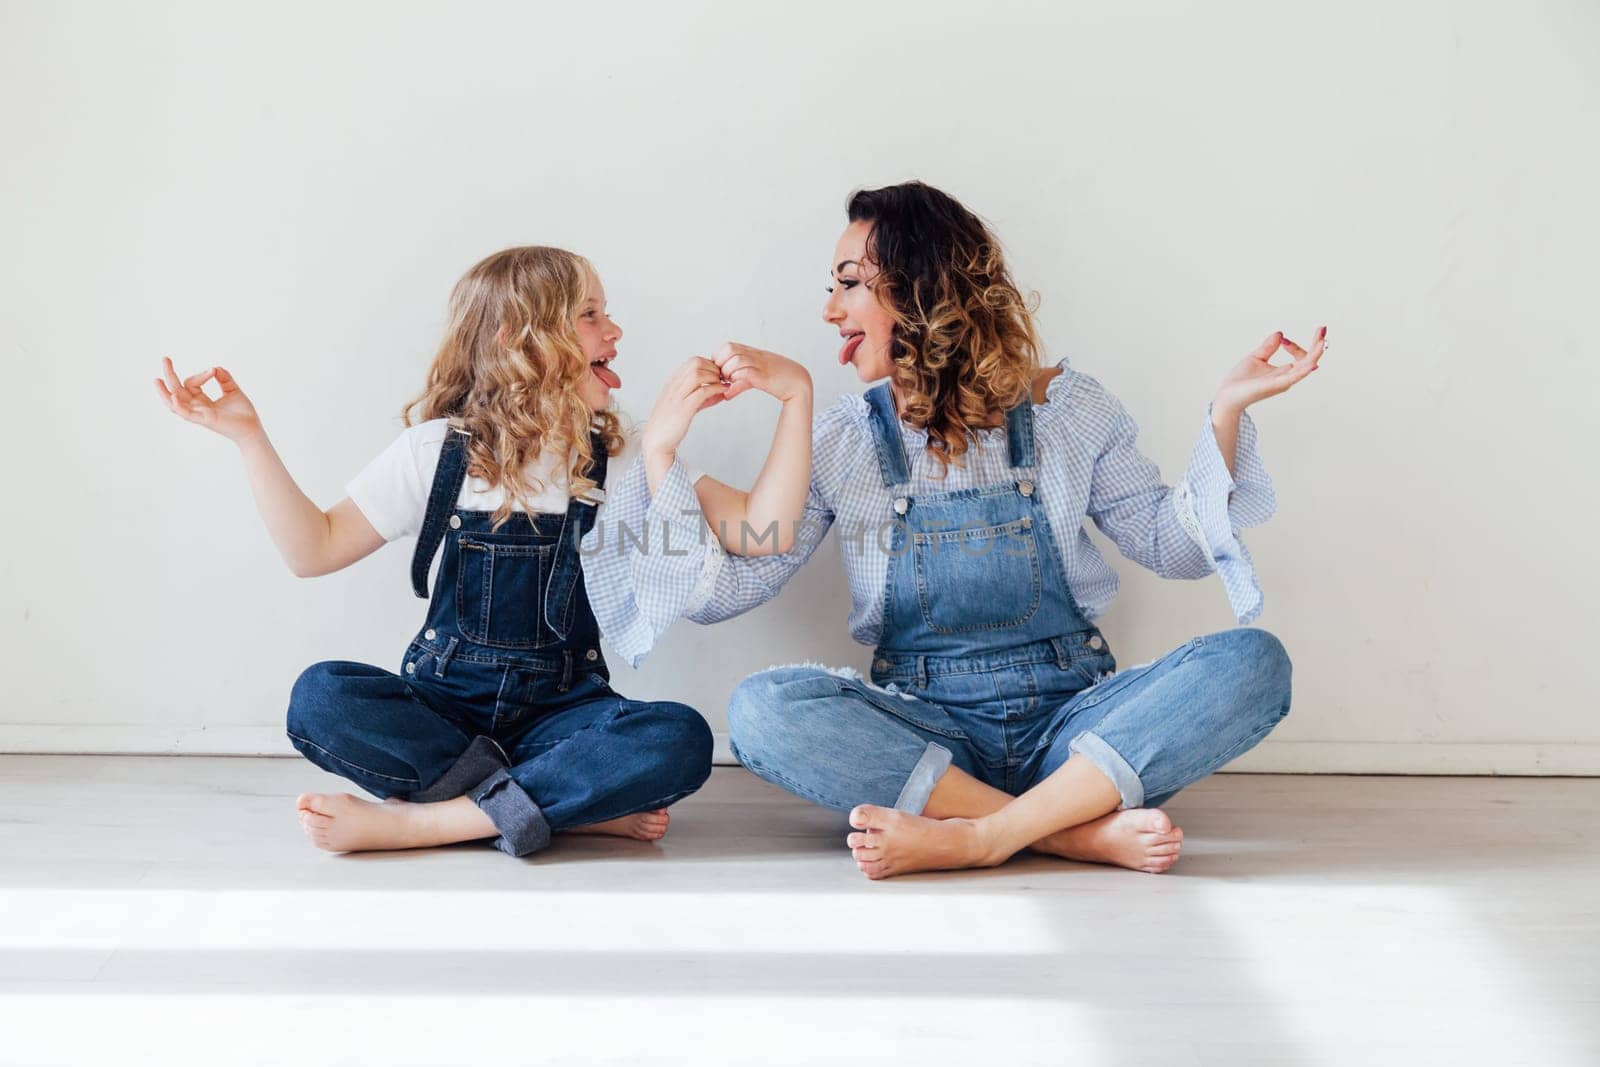 Mom and daughter play show heart with hands by Simakov